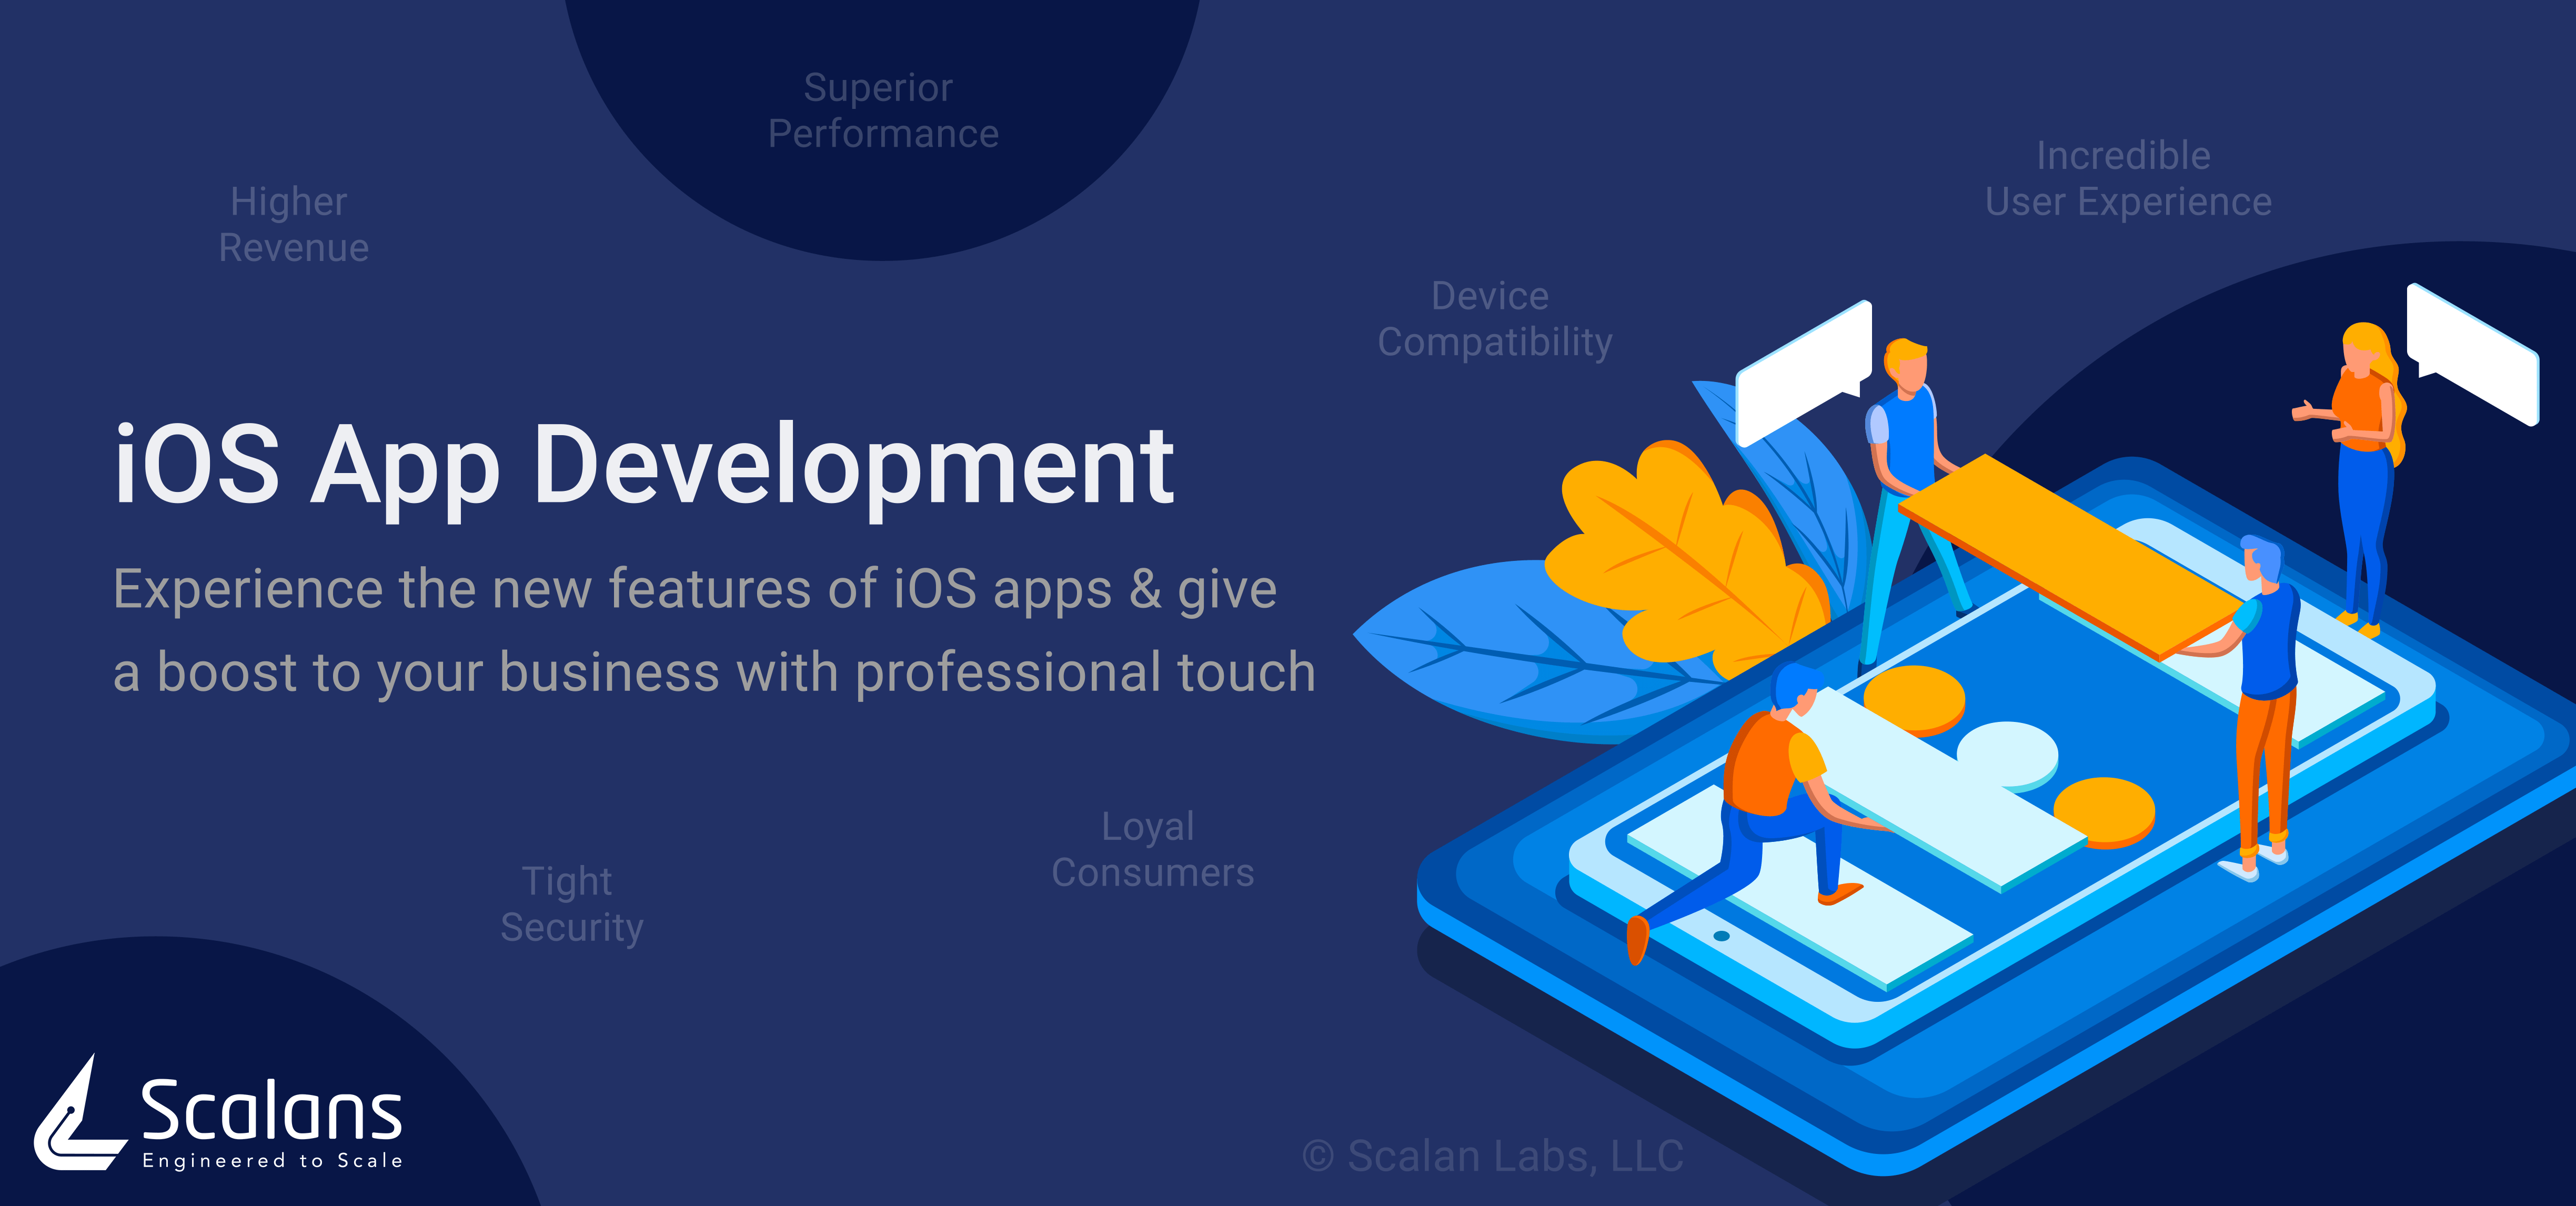 Hire Dedicated iOS App Developers at Scalan Labs LLC